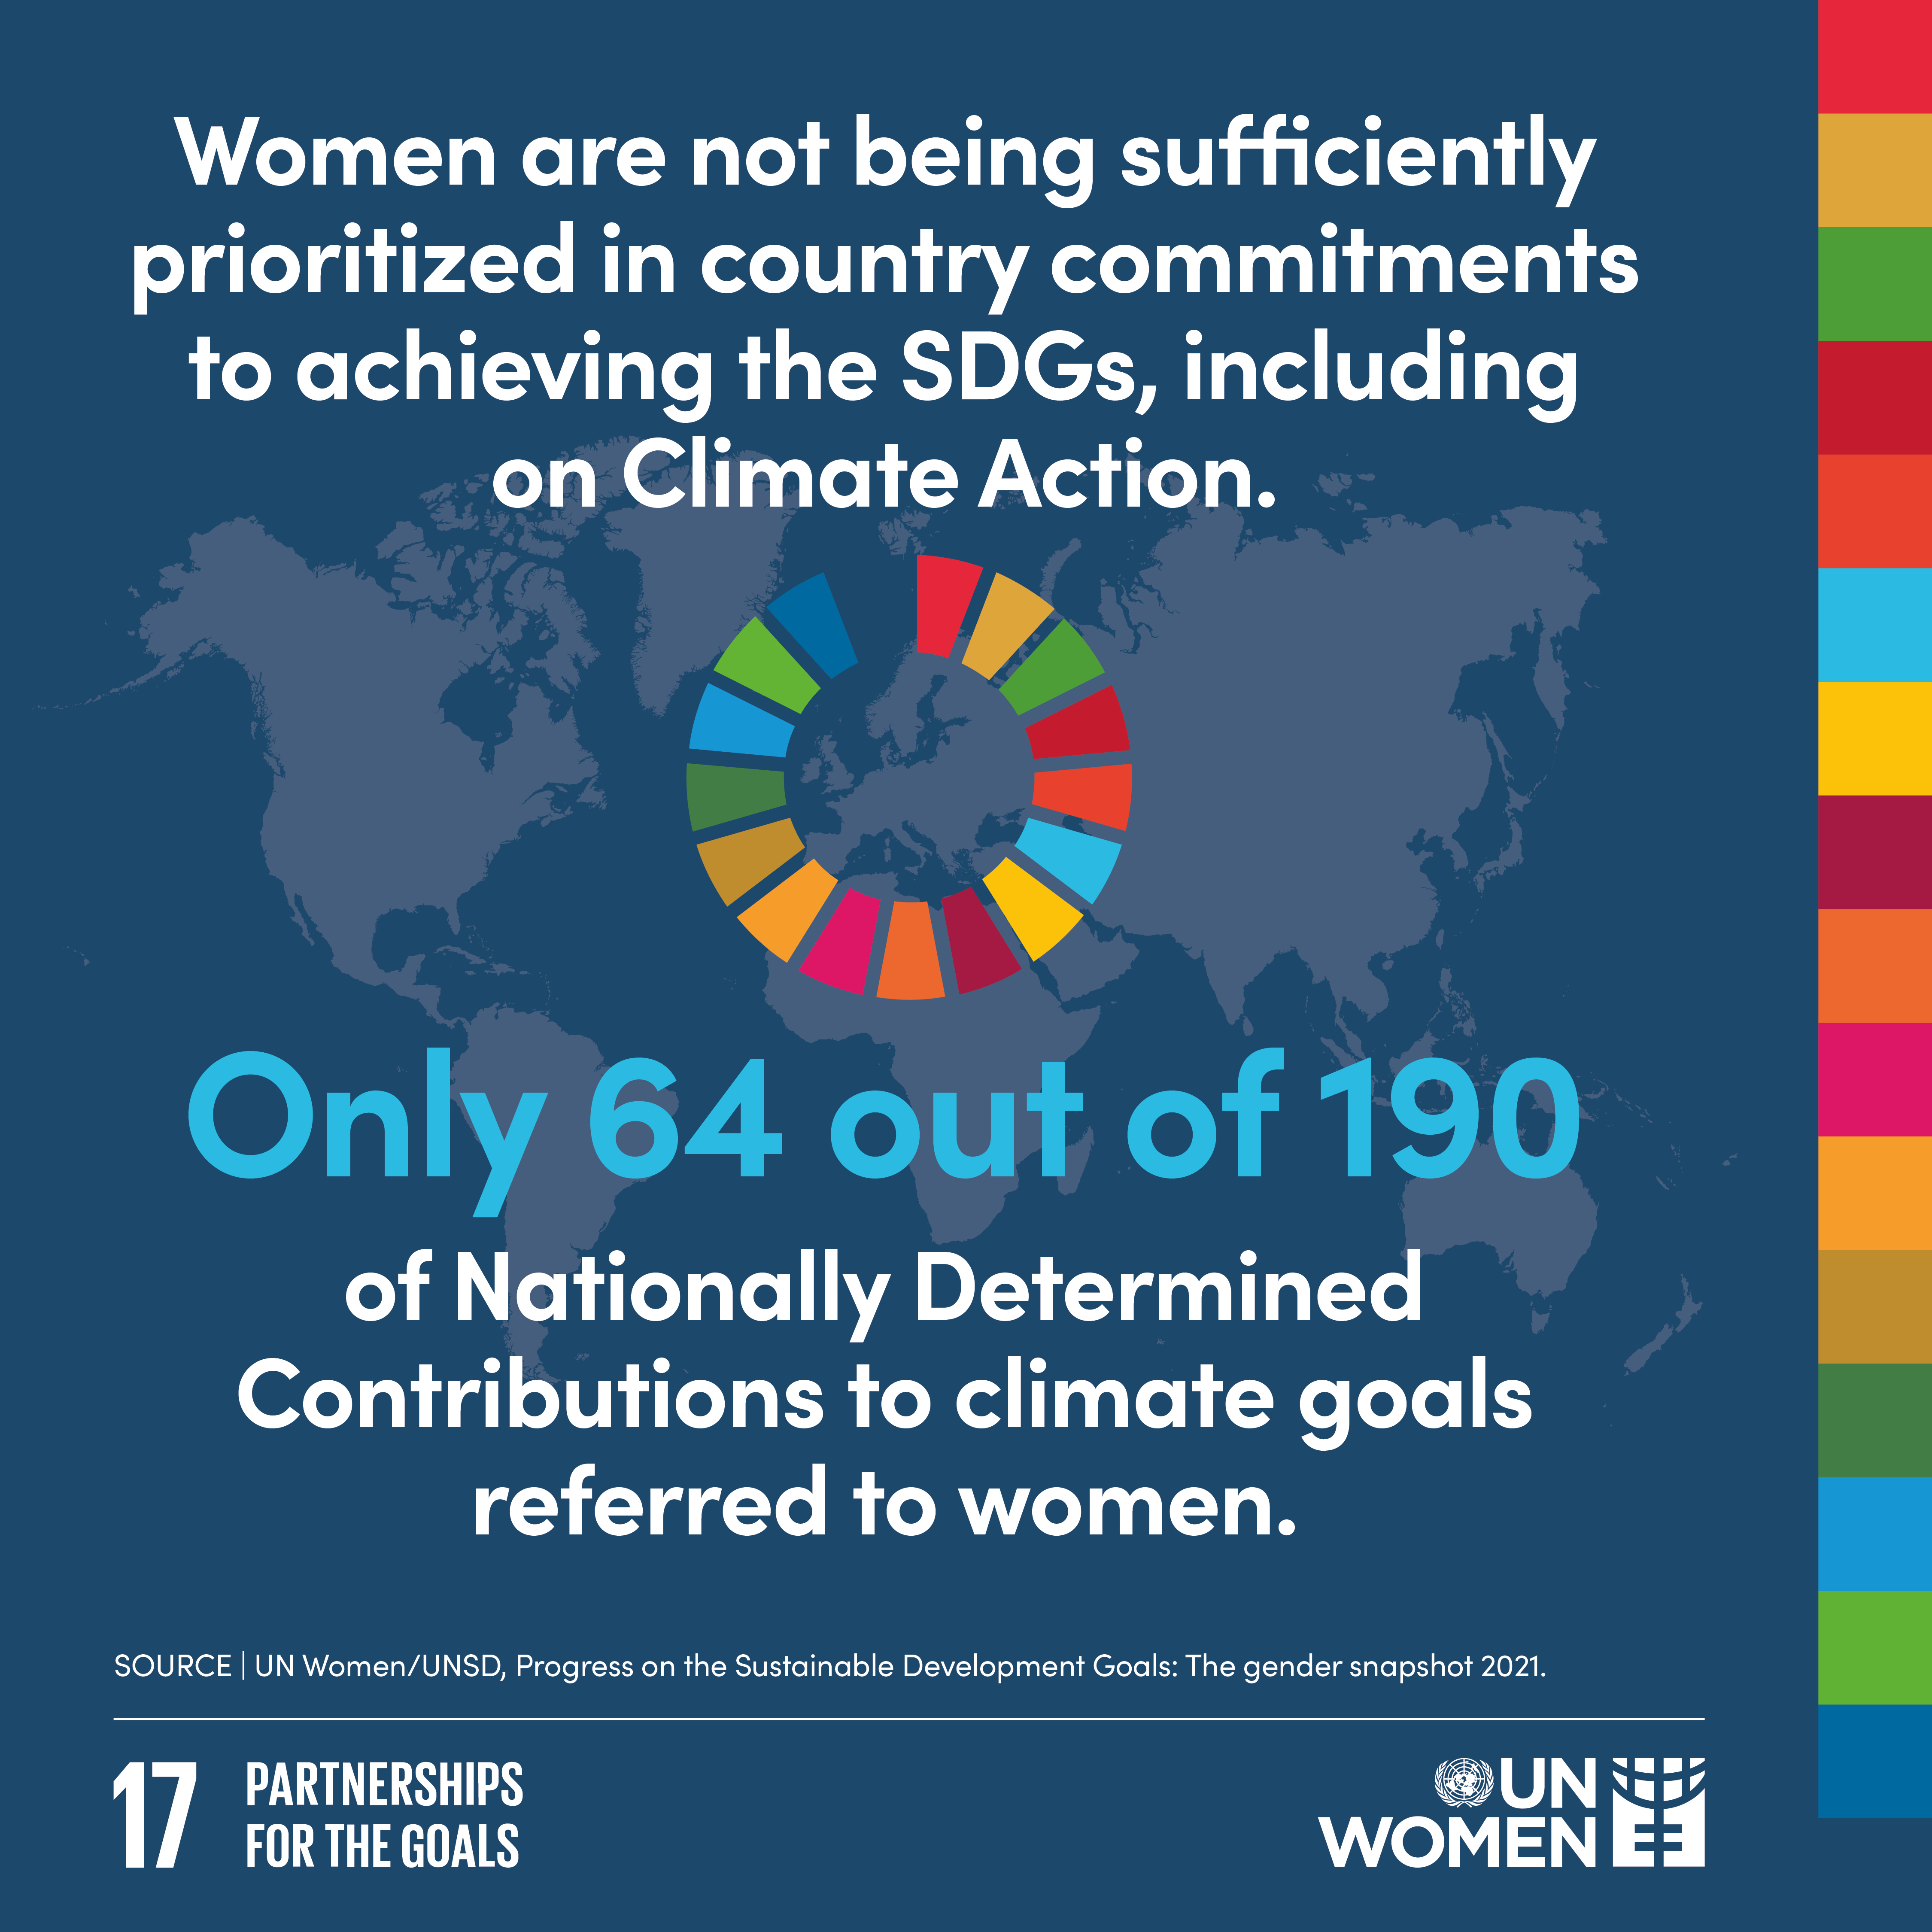 Women are not being sufficiently prioritized in country commitments to achieving the SDGs, including on Climate Action. Only 64 out of 190 of nationally determined contributions to climate goals referred to women.